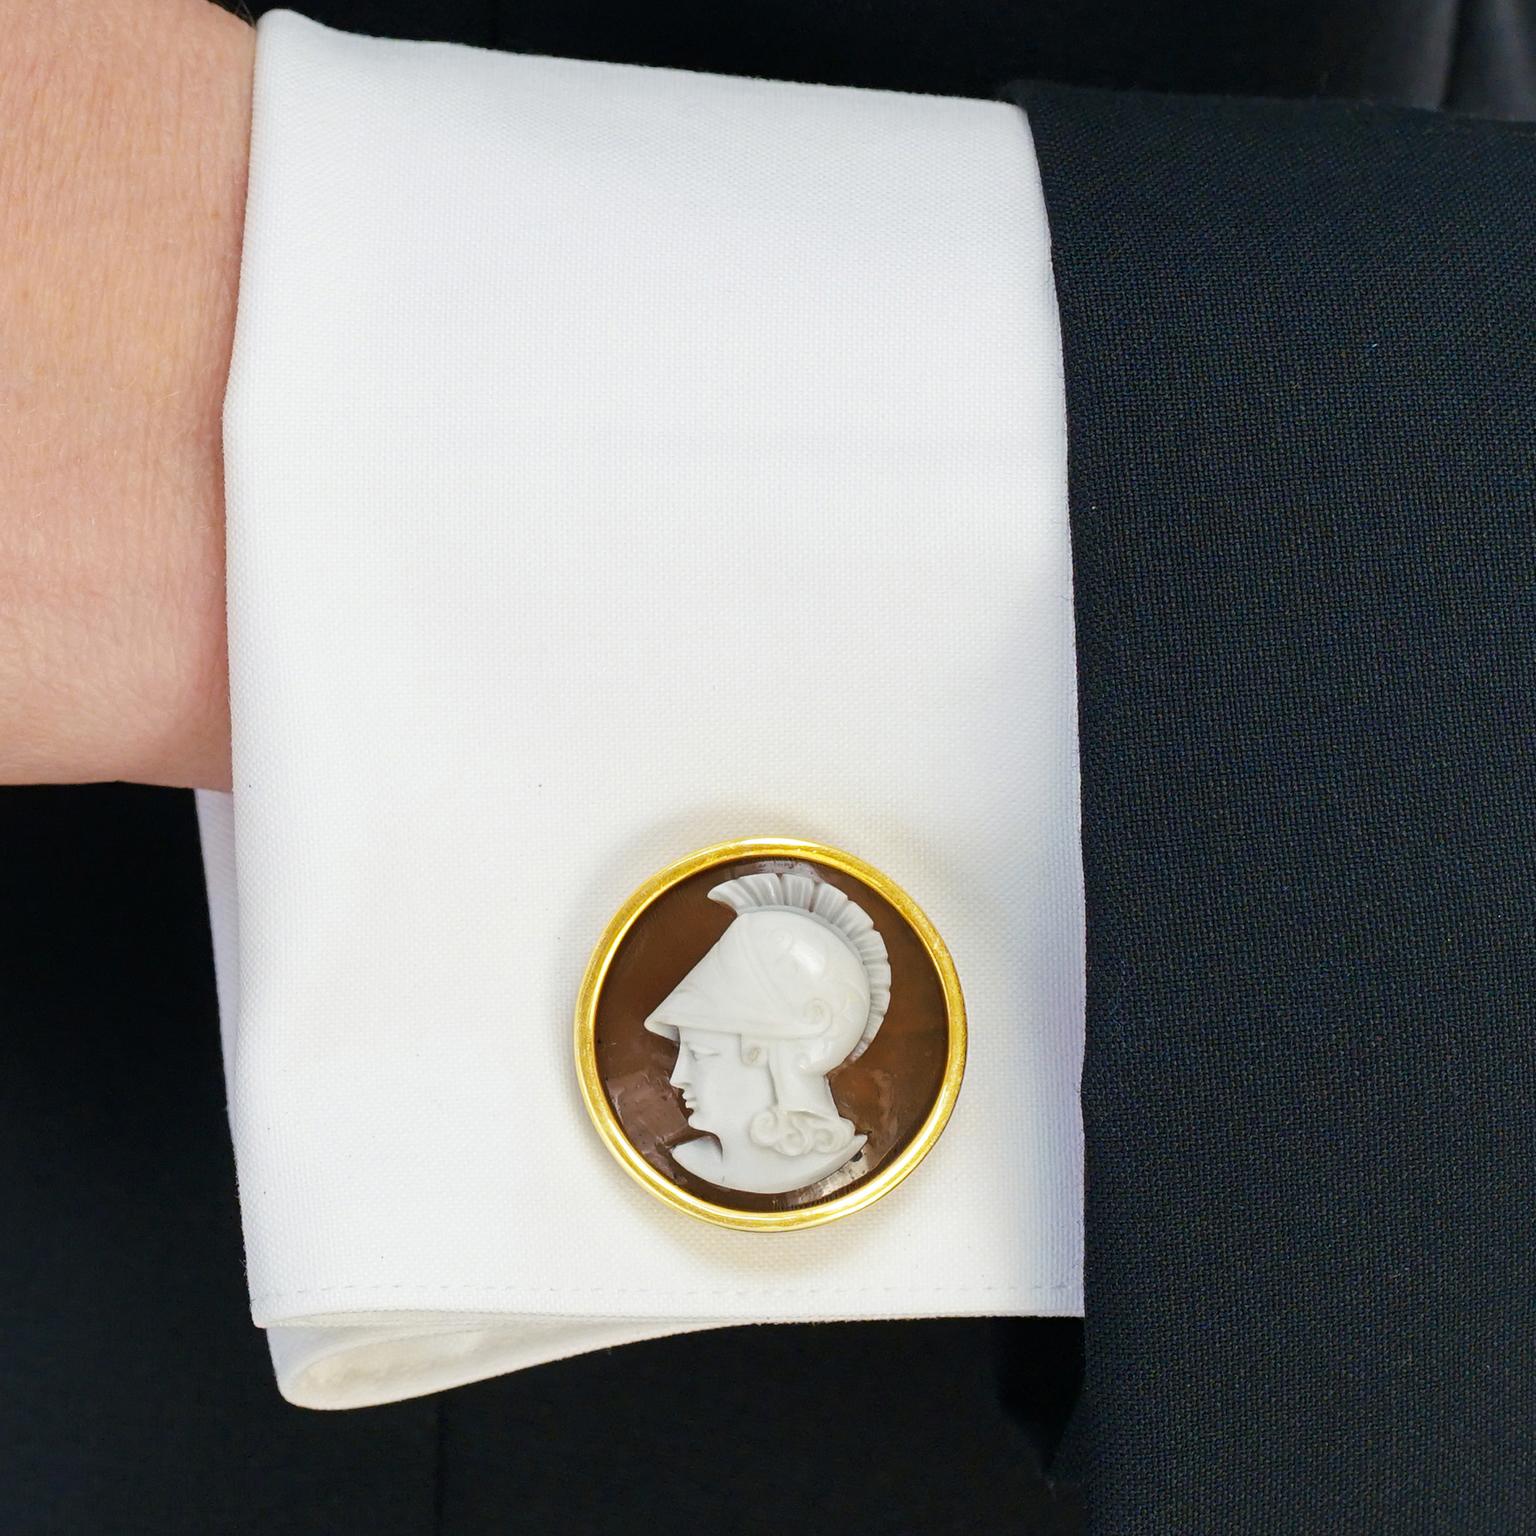 Circa 1960s, 14k, American. Decorated with classical motif cameos, these huge 14k gold cufflinks will compliment your velvet paisley smoking jacket perfectly! Fabulously oversized with beautifully carved left and right cameos, they are well made and